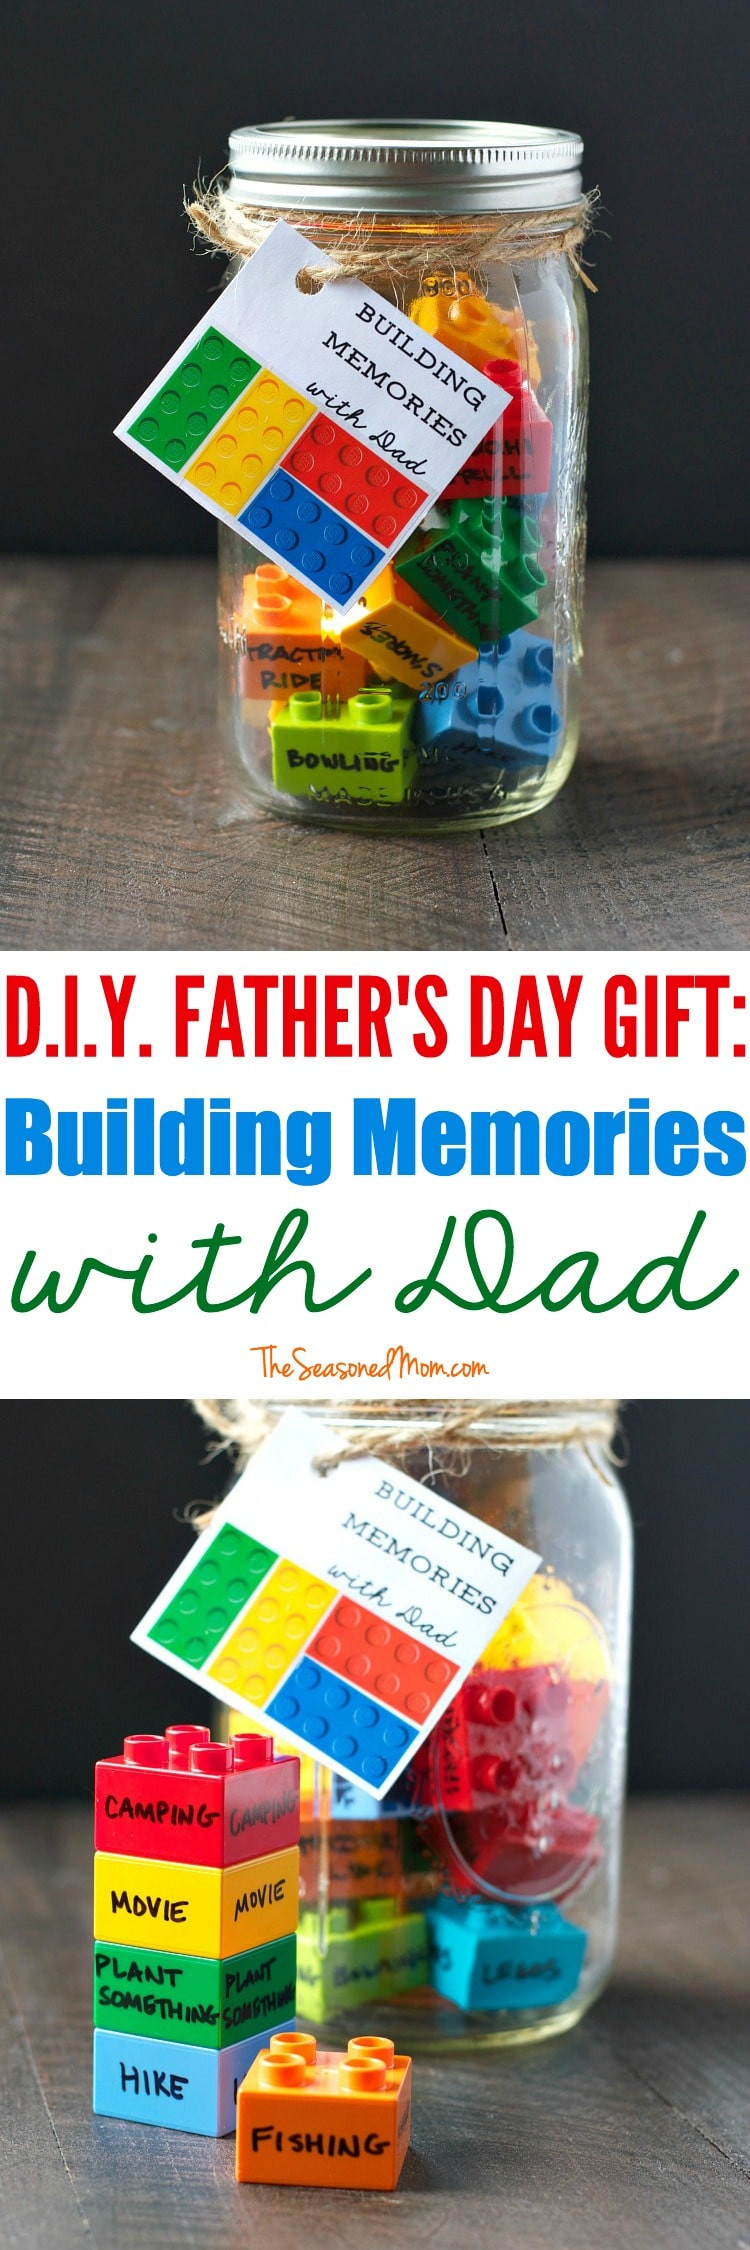 Homemade Fathers Day Gifts
 25 Homemade Father s Day Gifts from Kids That Dad Can